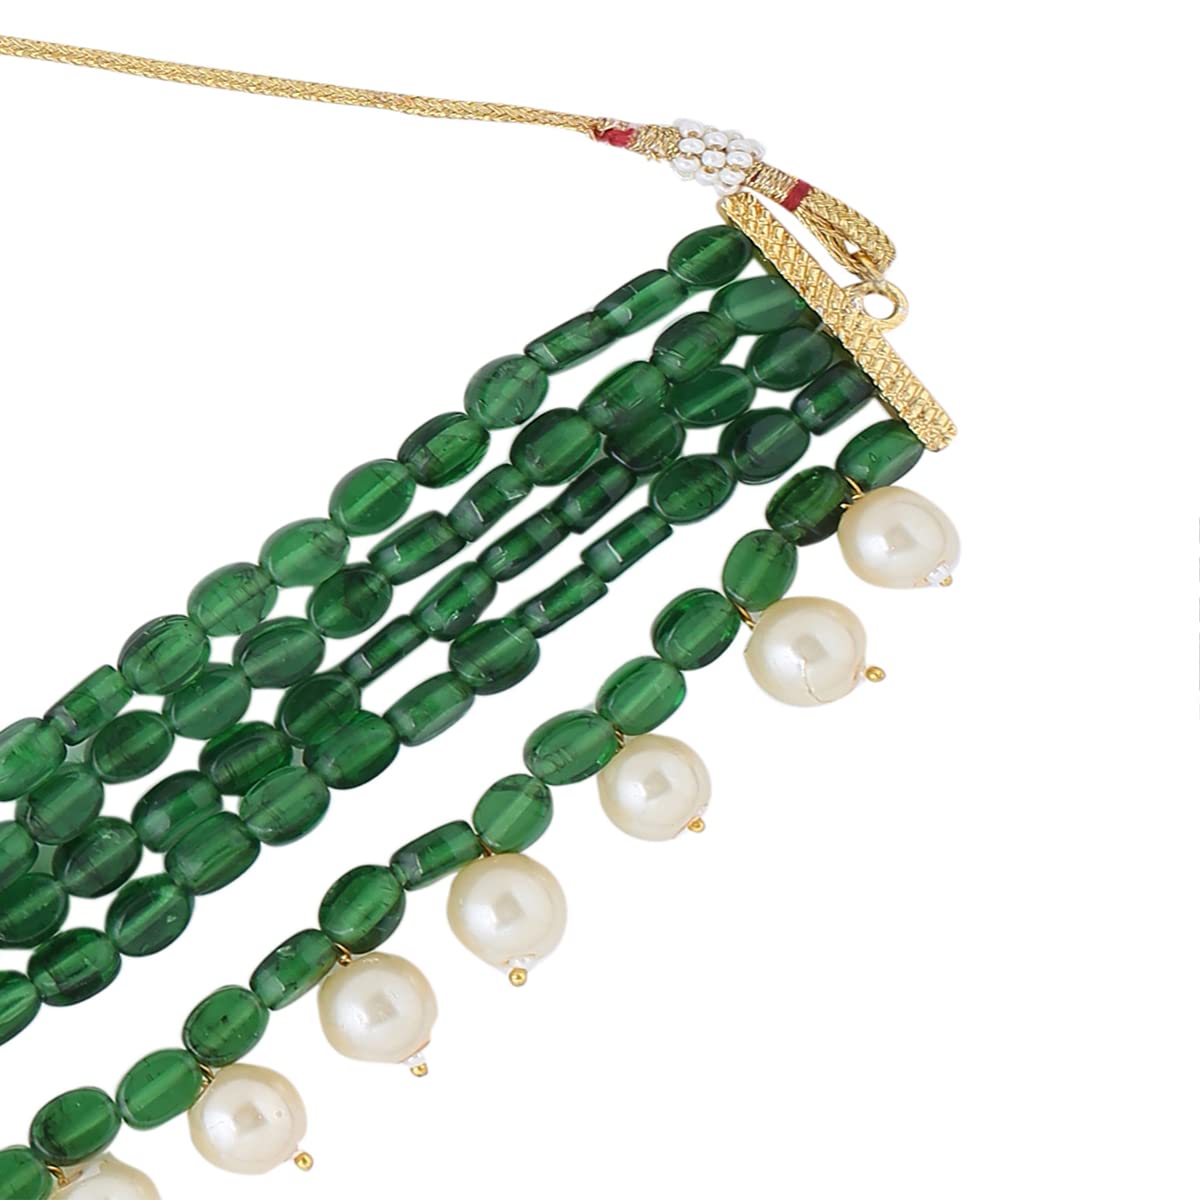 Yellow Chimes Necklace for Women and Girls Beads Necklace for Women | Multilayer Green Beads Choker Necklace | Birthday Gift for girls and women Anniversary Gift for Wife